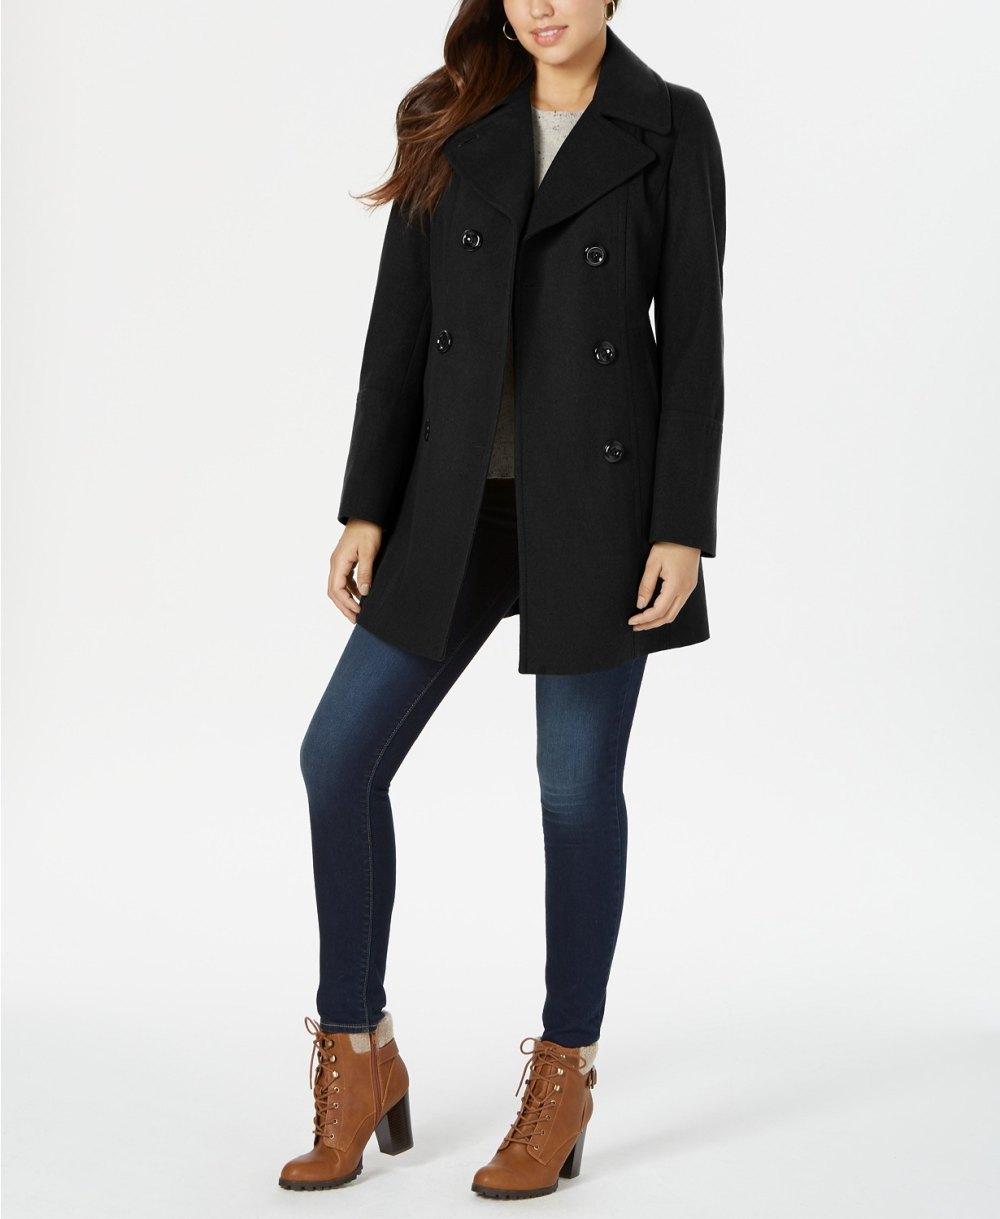 Anne Klein Double-Breasted Peacoat